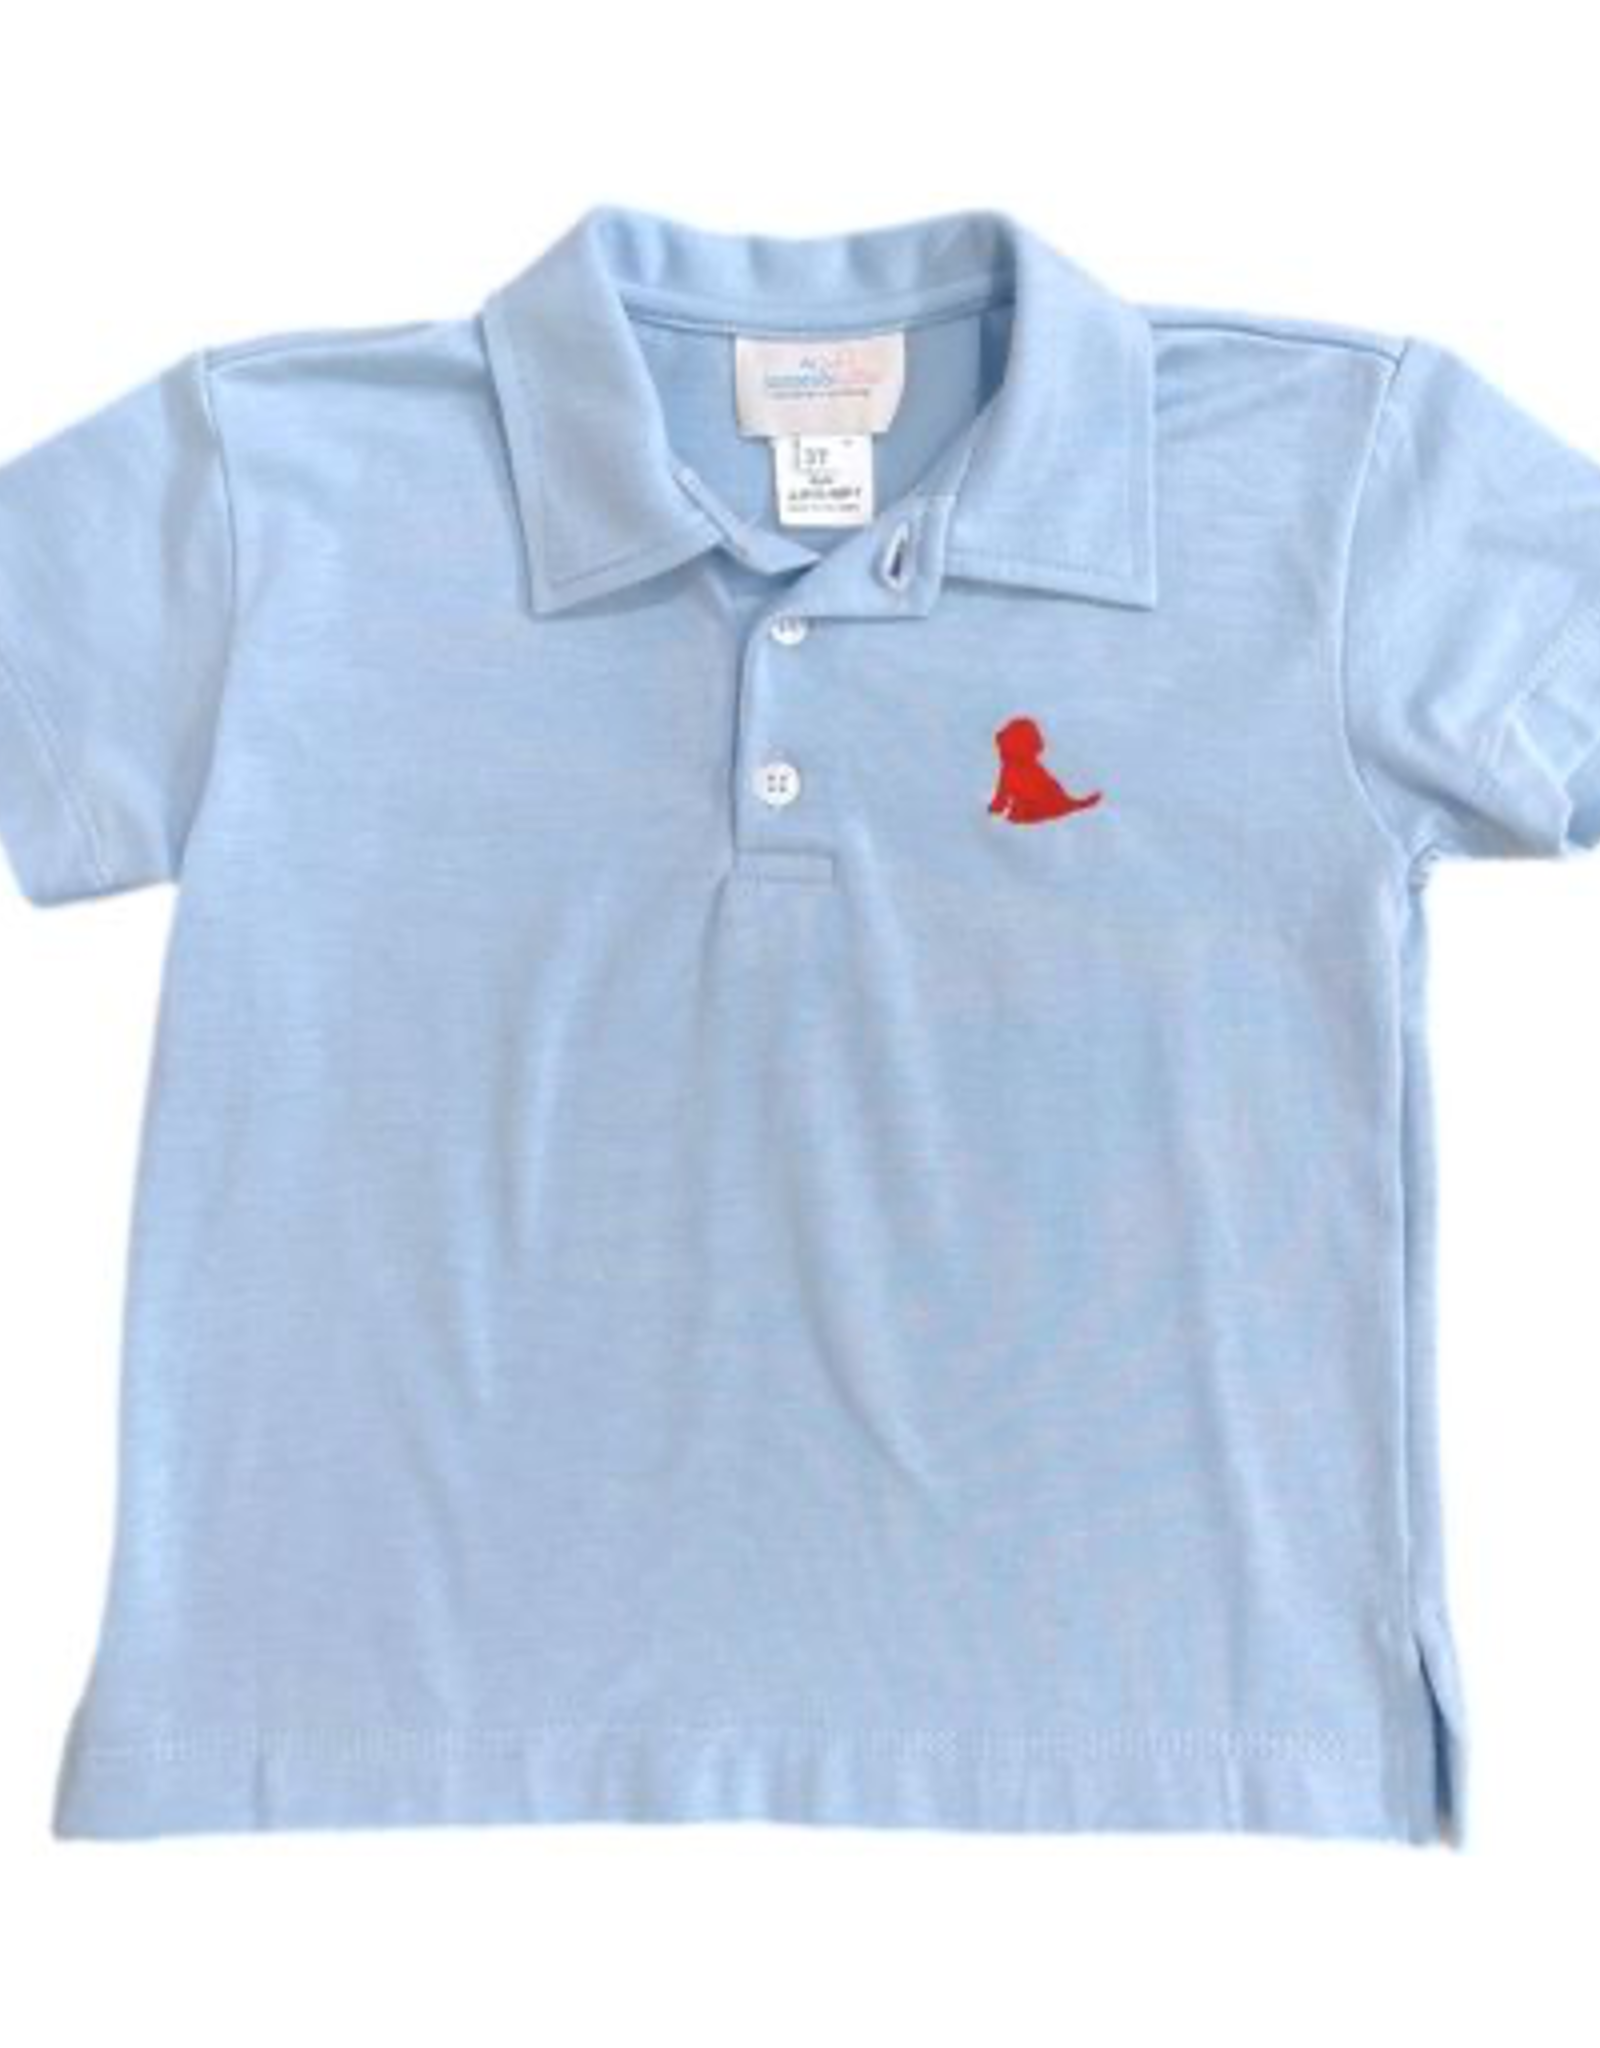 James and Lottie Light Blue Polo with Red Puppy